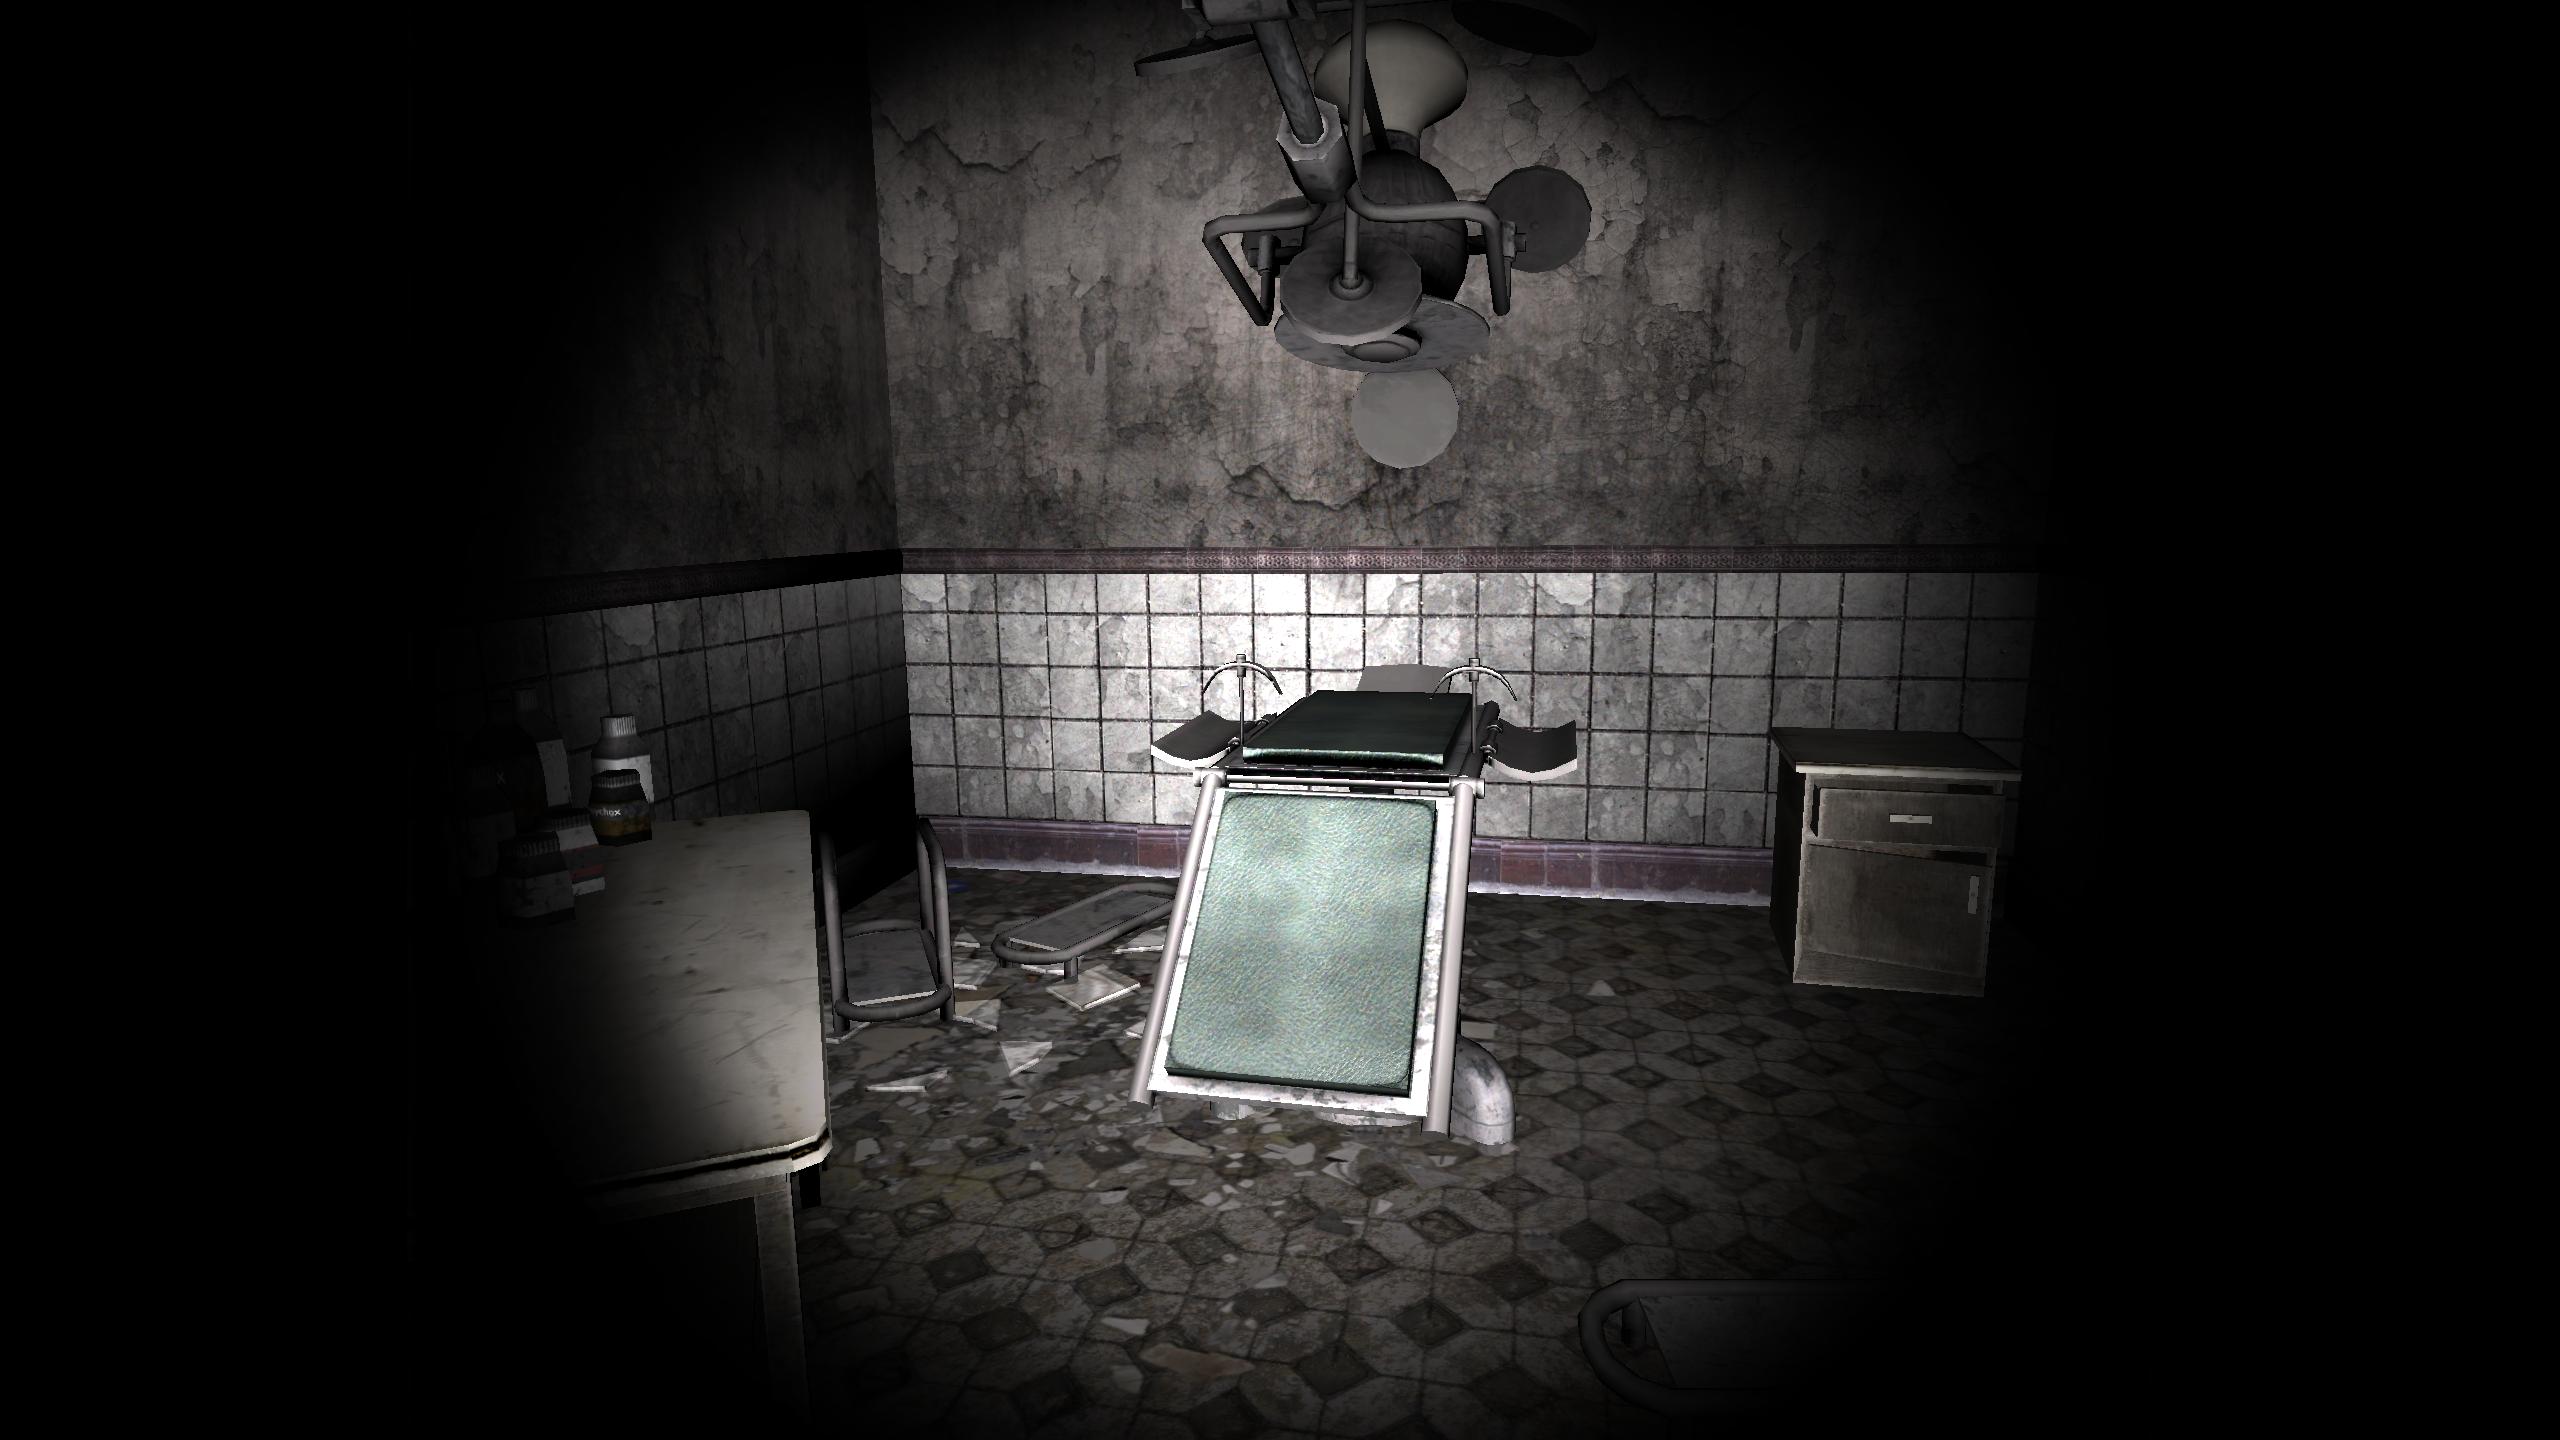 Download and play Paranormal: Multiplayer Horror on PC & Mac